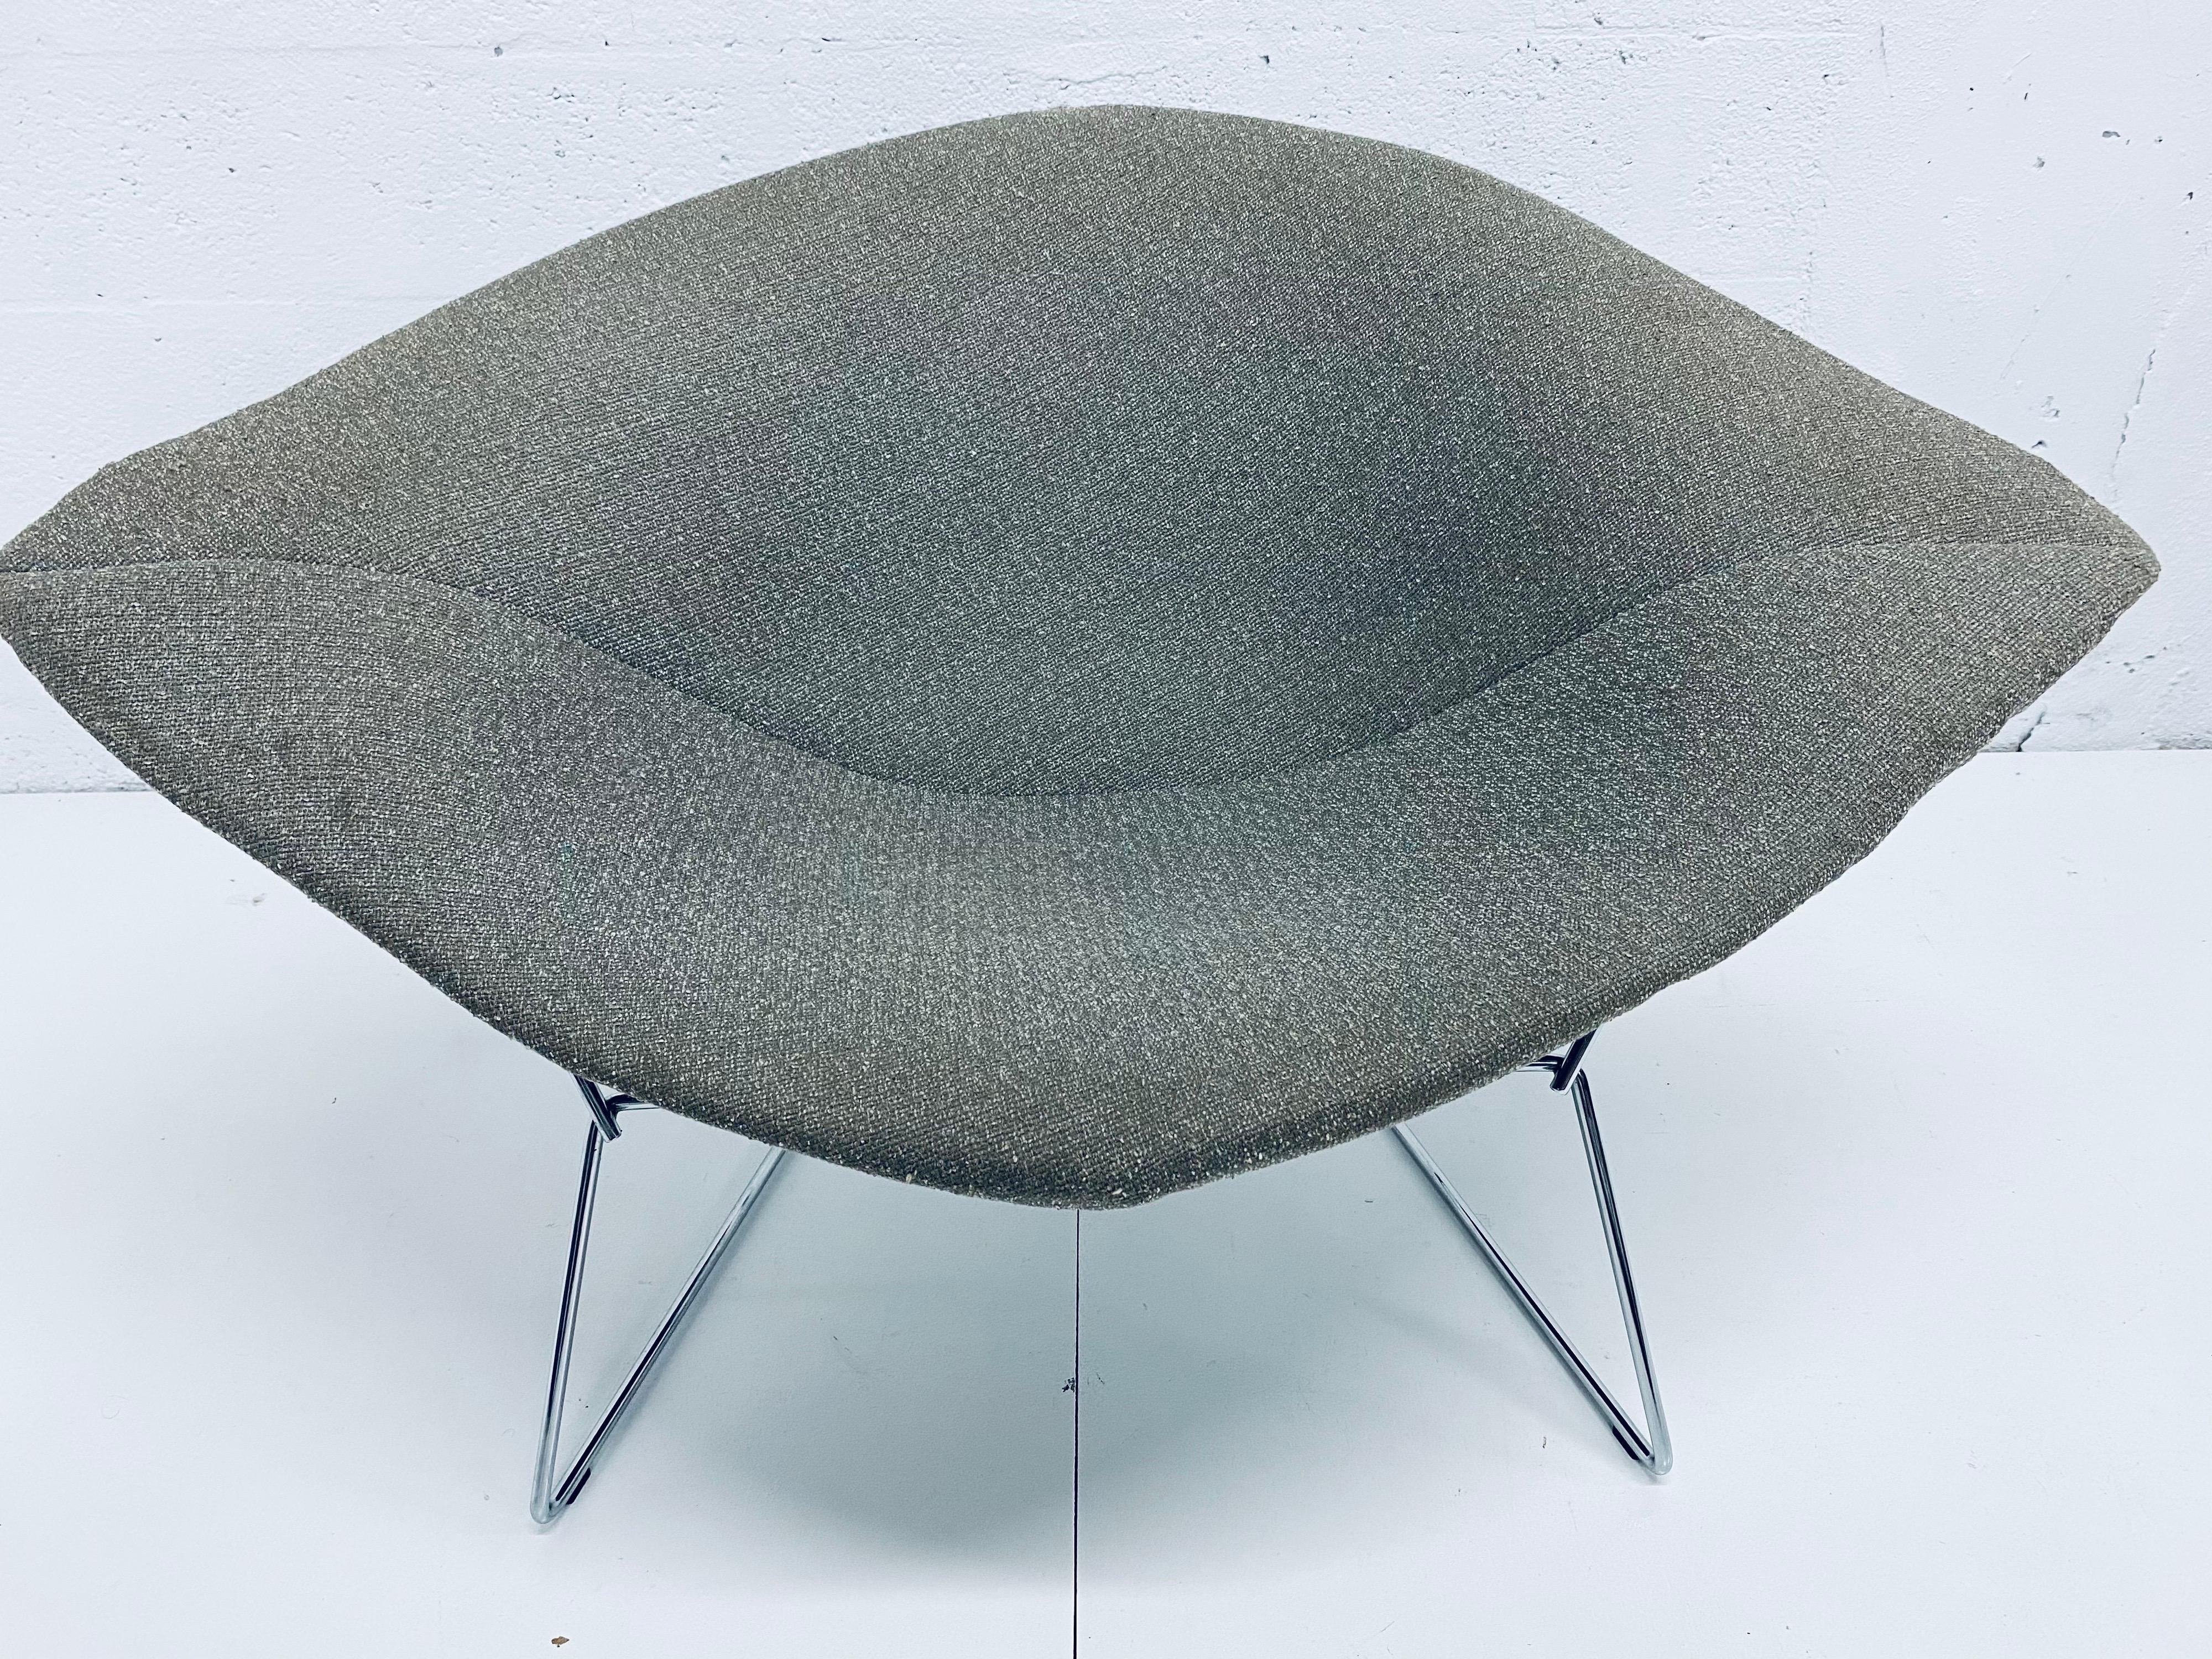 Original wide diamond chair with authentic seat cover from the 1960s designed by Harry Bertoia for Knoll. The upper seat has been professionally powder-coated in satin black and the existing chrome plated base has been polished. Use with the